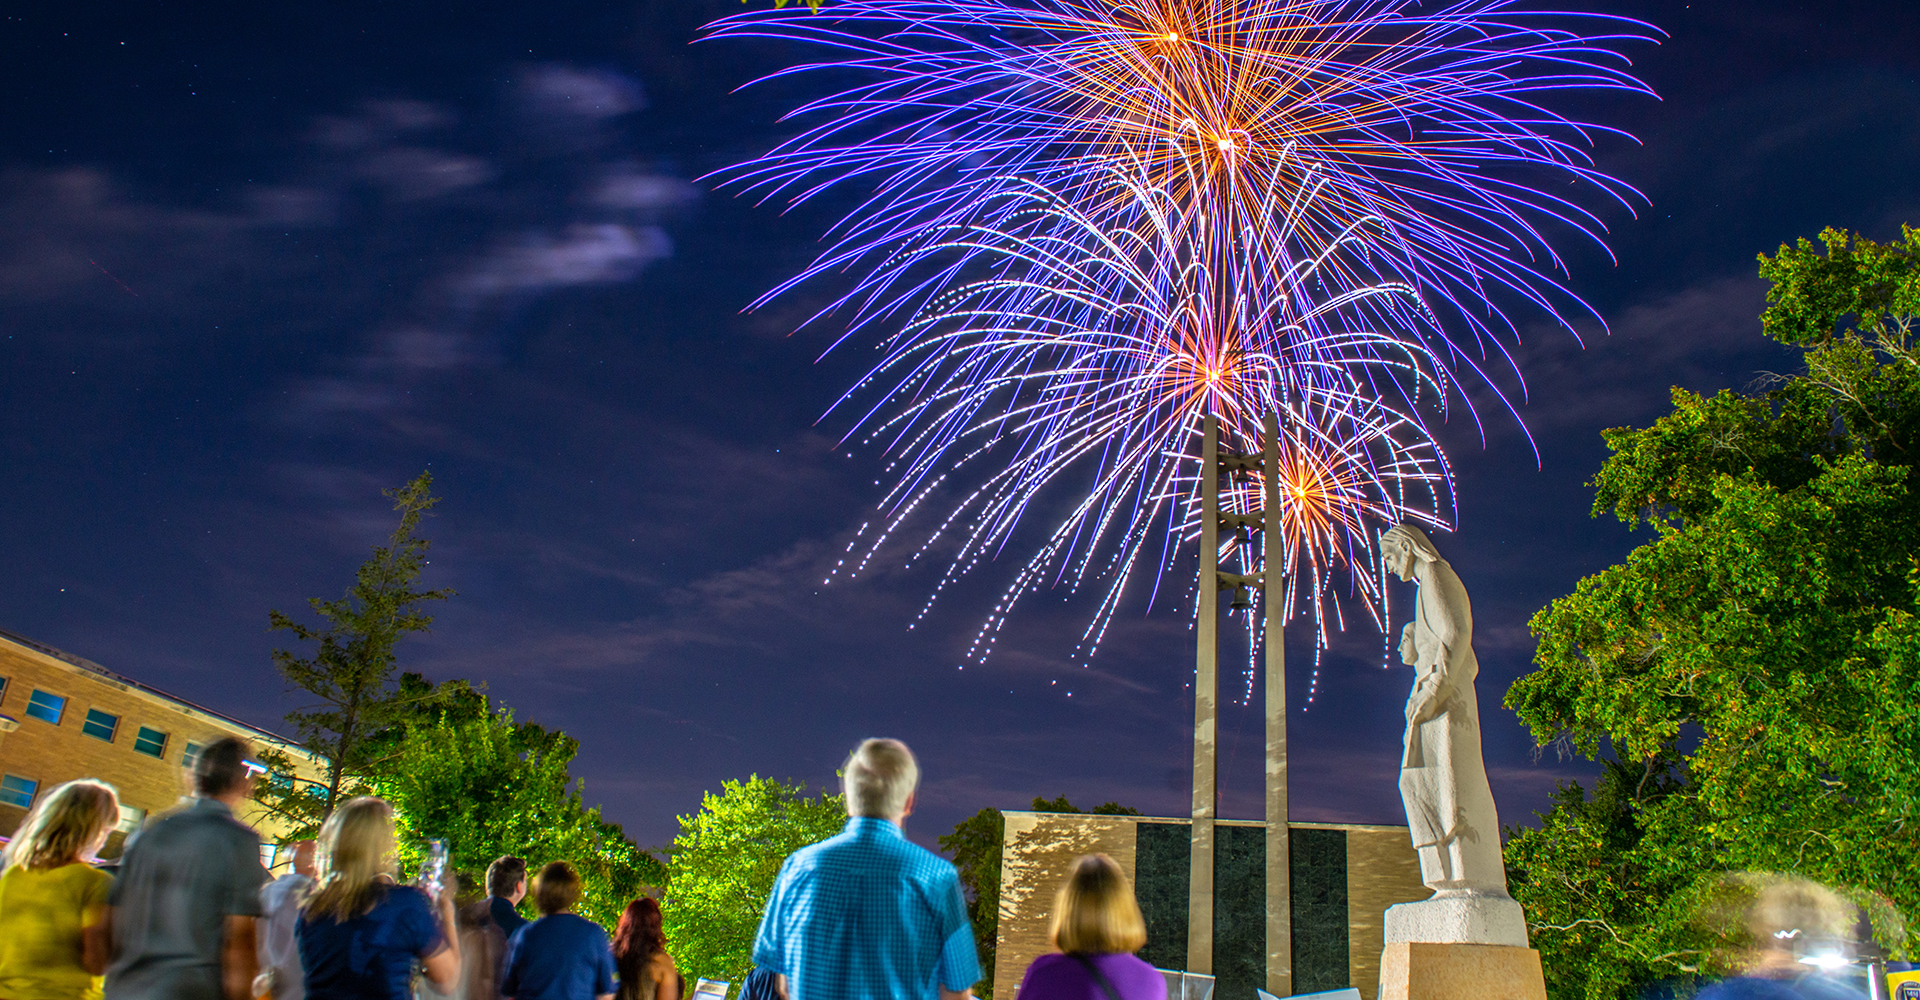 MSJ faculty and staff gathered in quad next to St. Joseph Statue watching beautiful fireworks in evening sky,